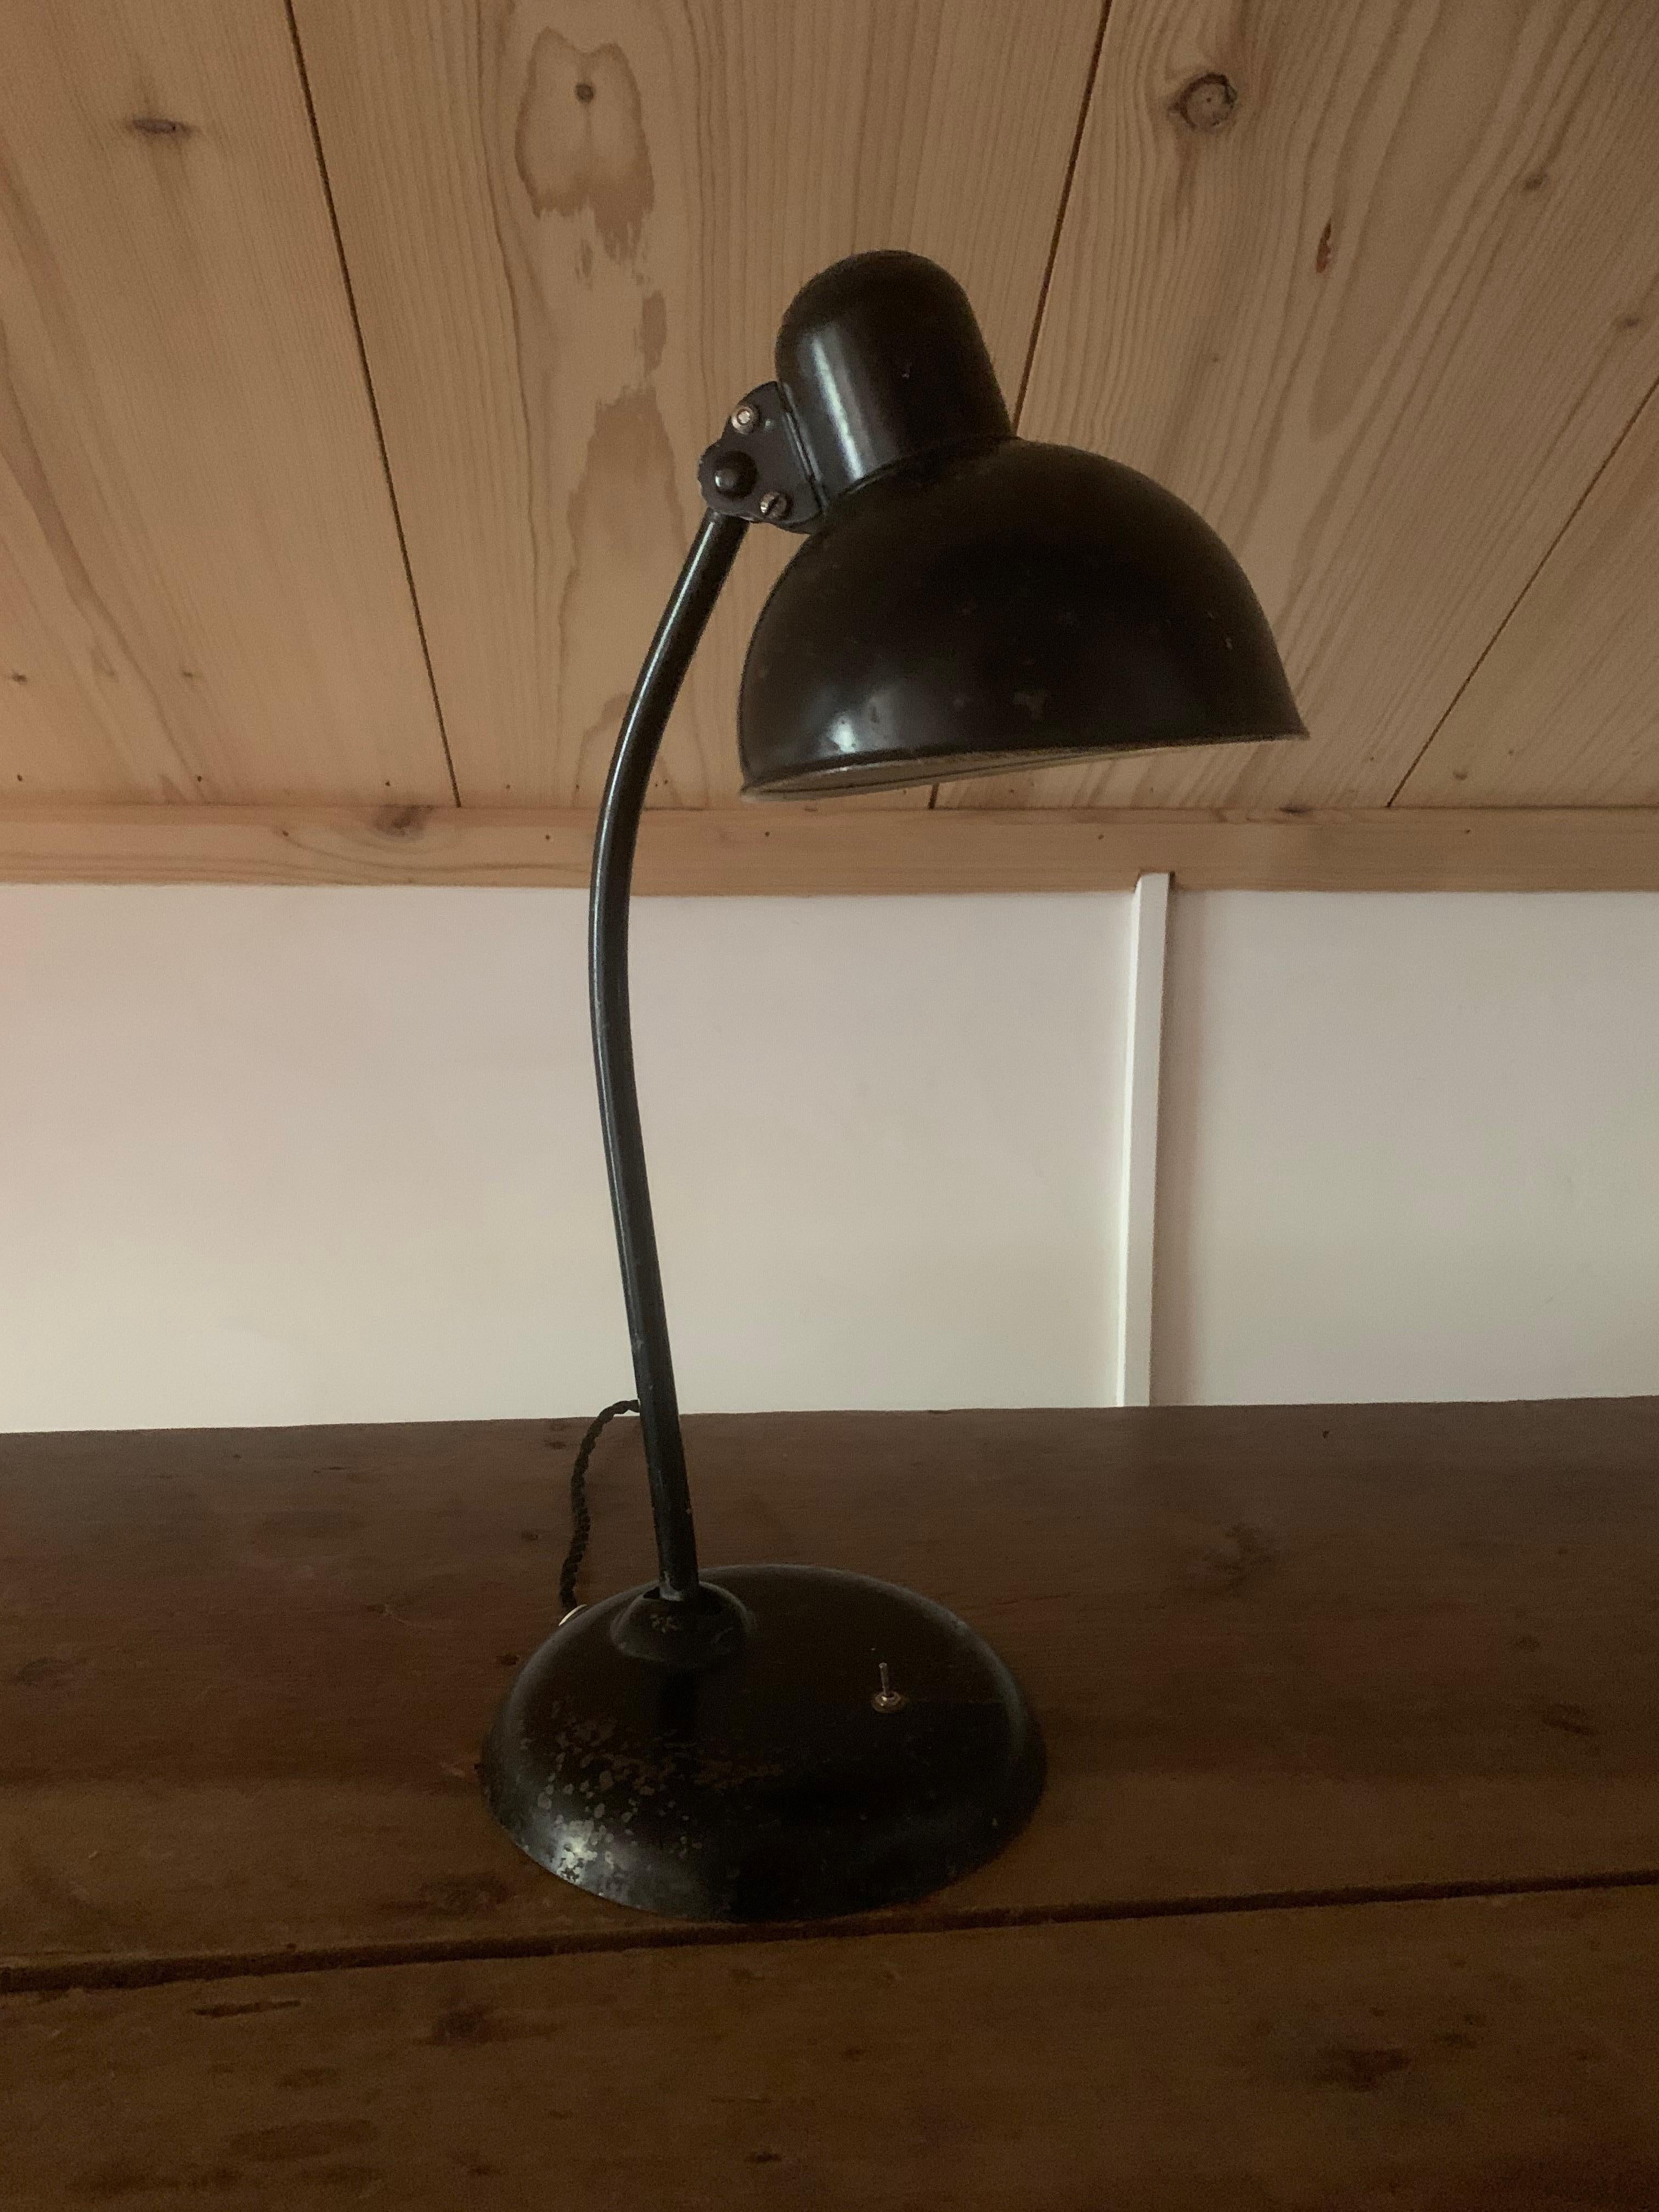 A black enameled steel adjustable desk lamp. Design by Christian Dell for Idell Kaiser Germany, circa 1930s.
Original condition, the switch has been replaced and rewiring.